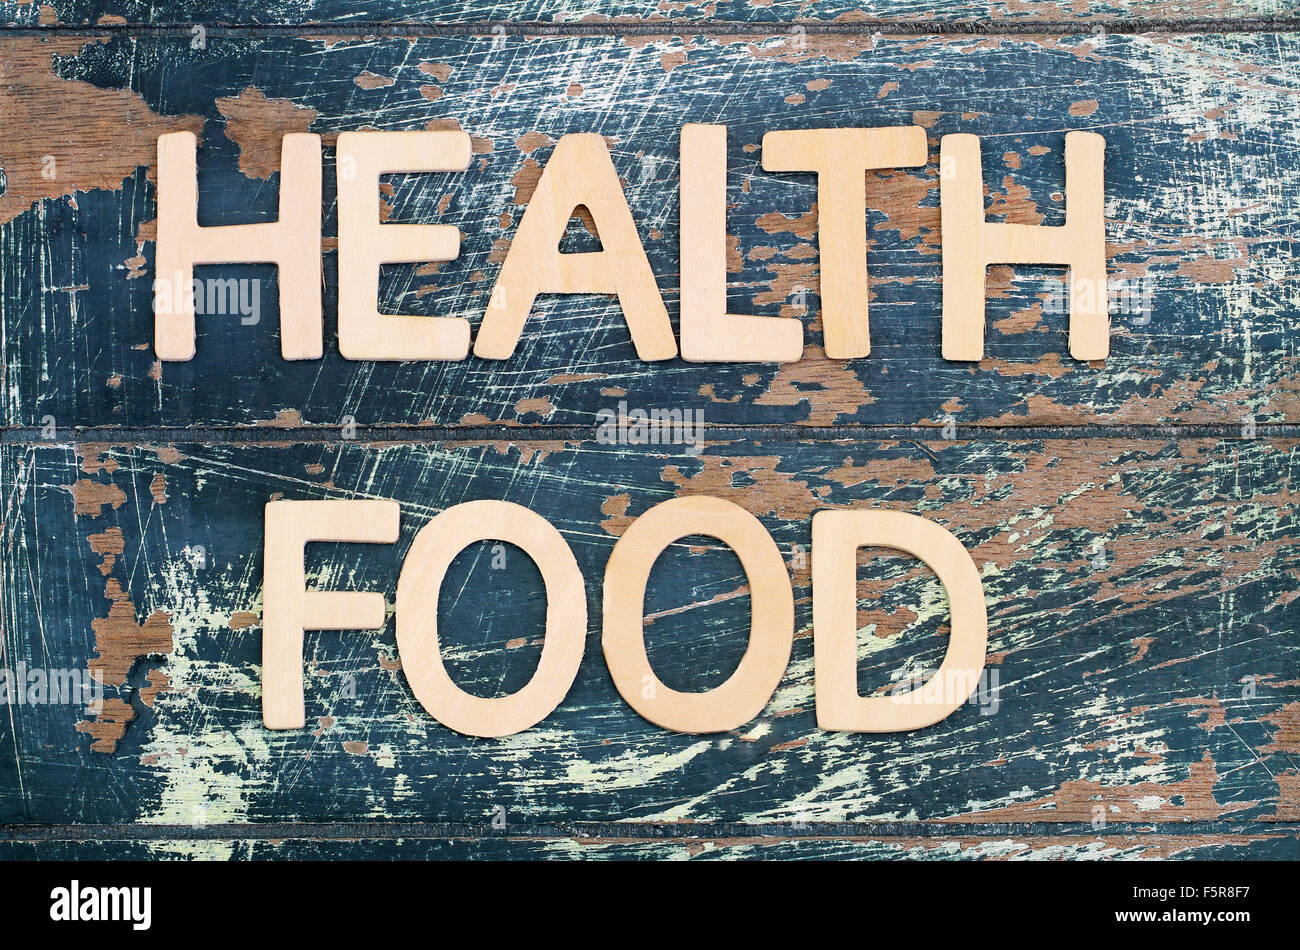 Health food written with wooden letters on rustic surface Stock Photo